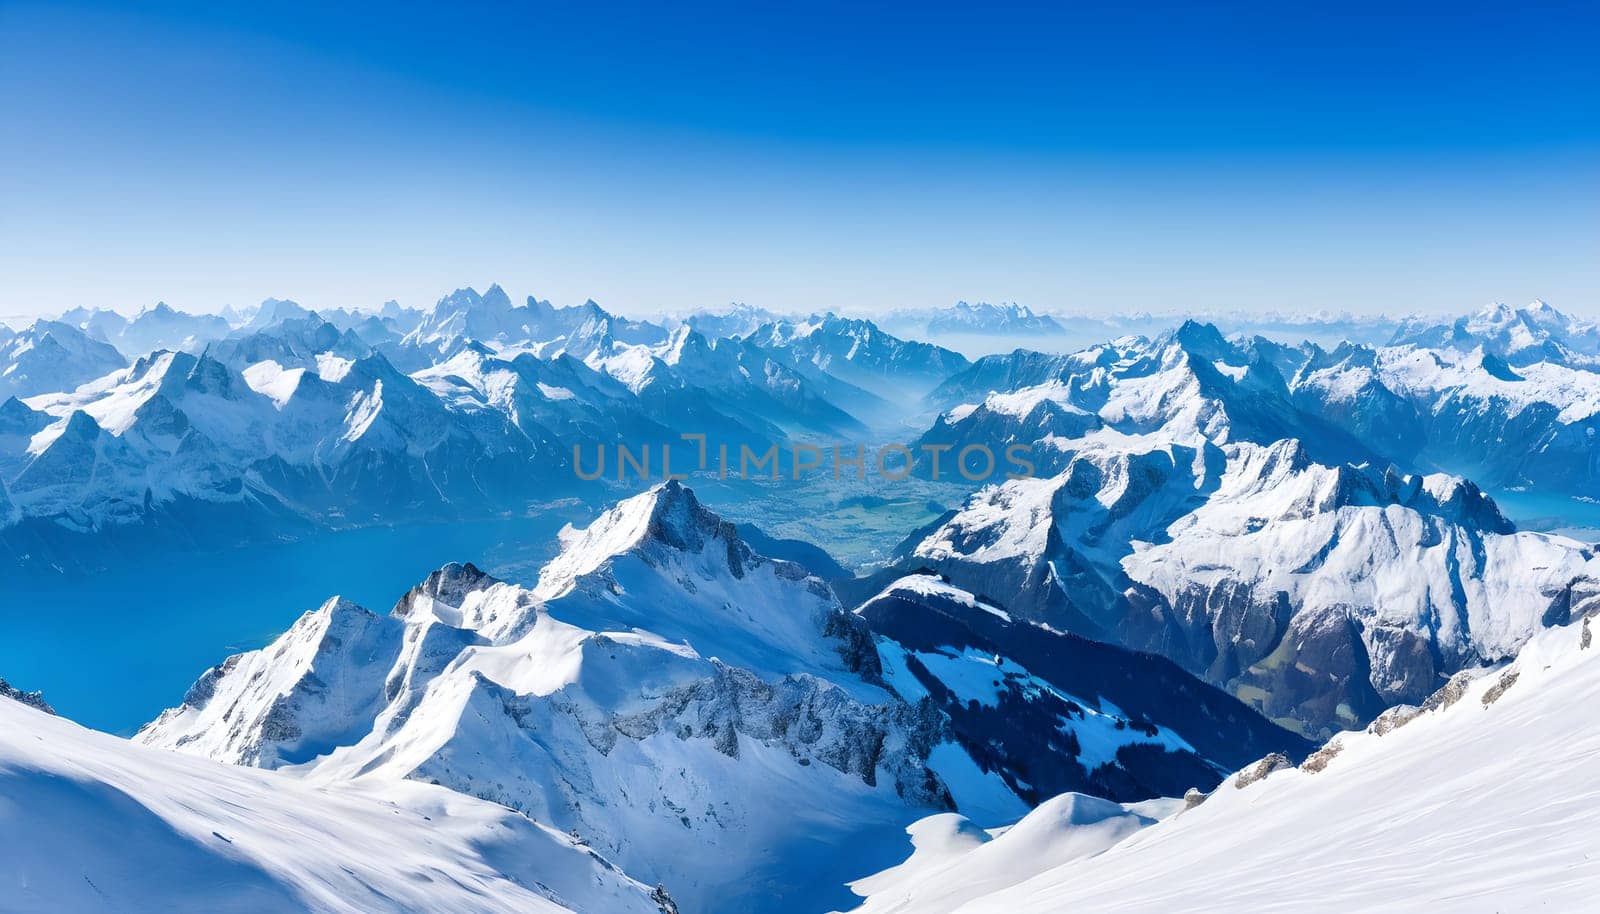 Mountain Majesty: Snow-capped Peaks and Panoramic Views by Petrichor